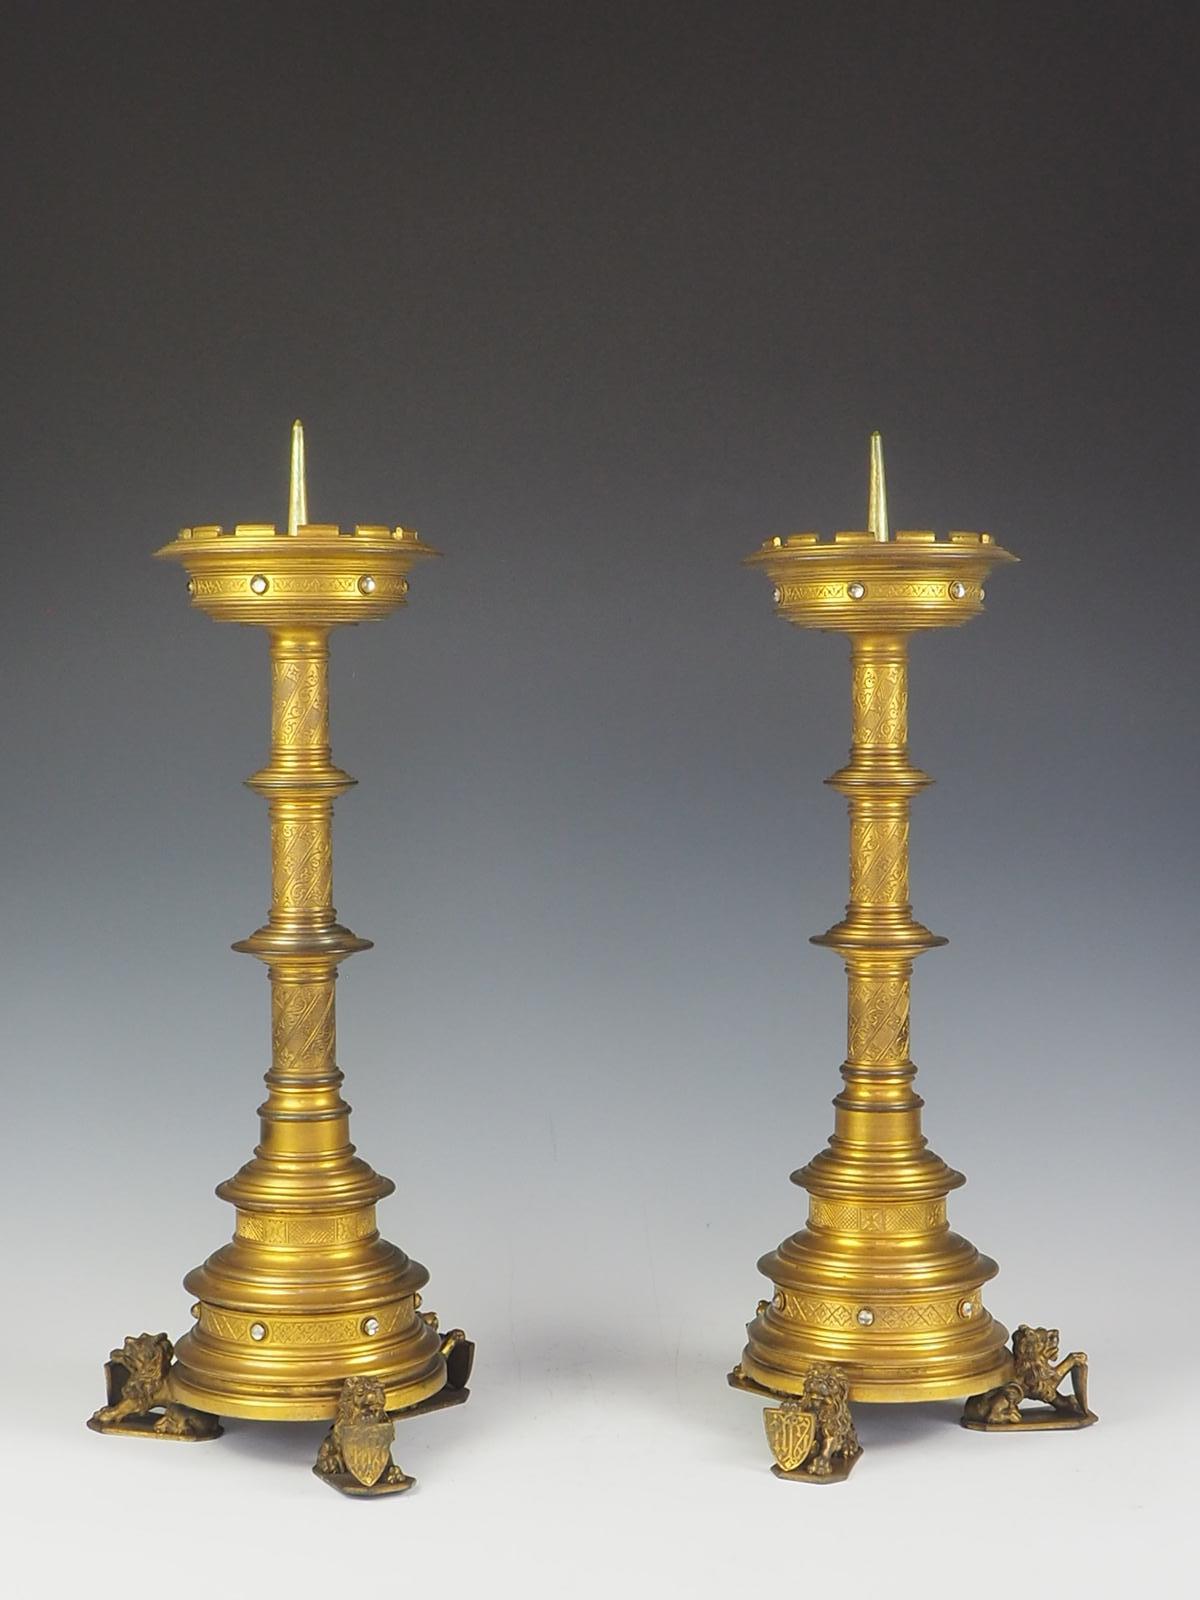 A truly exquisite 19th Century pair of gilt bronze Gothic revival Church candleholders

At the base of each candleholder there are 3 detailed lions stood proud holding shields

The candlestick shafts are beautiful detailed and cabochon stones